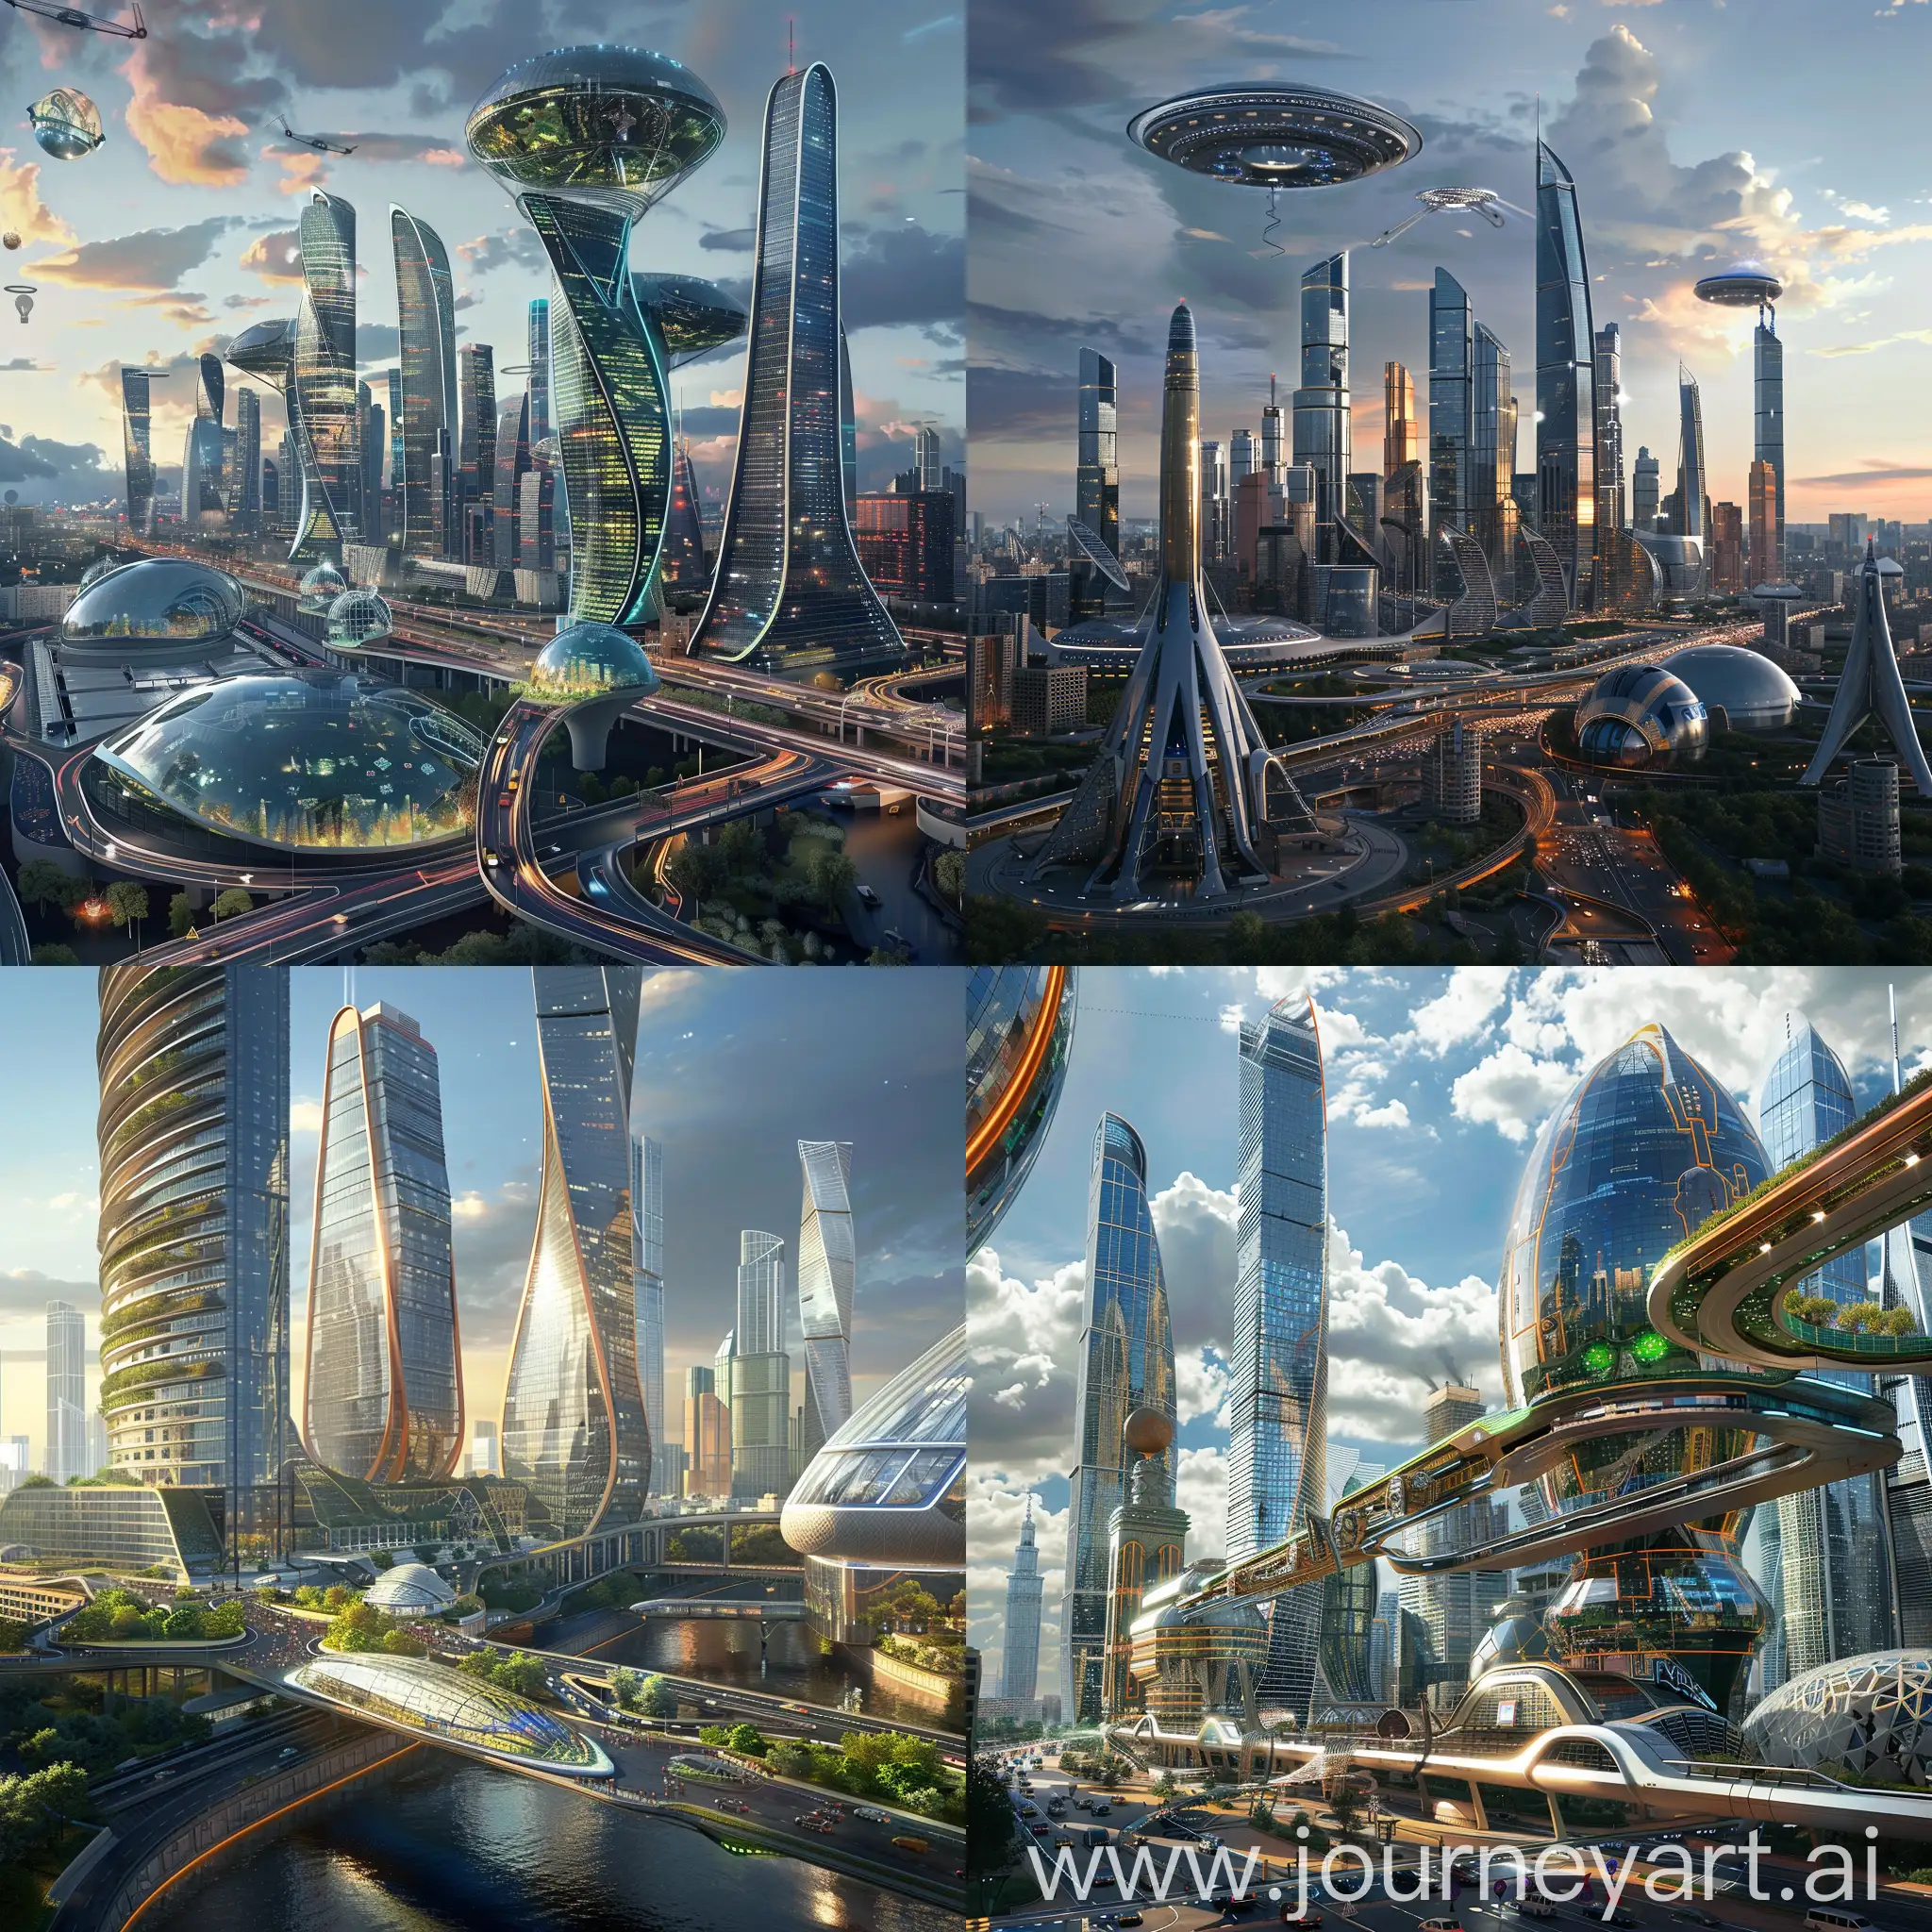 Futuristic-Moscow-SciFi-Urban-Landscape-with-Advanced-Technology-and-Smart-Infrastructure